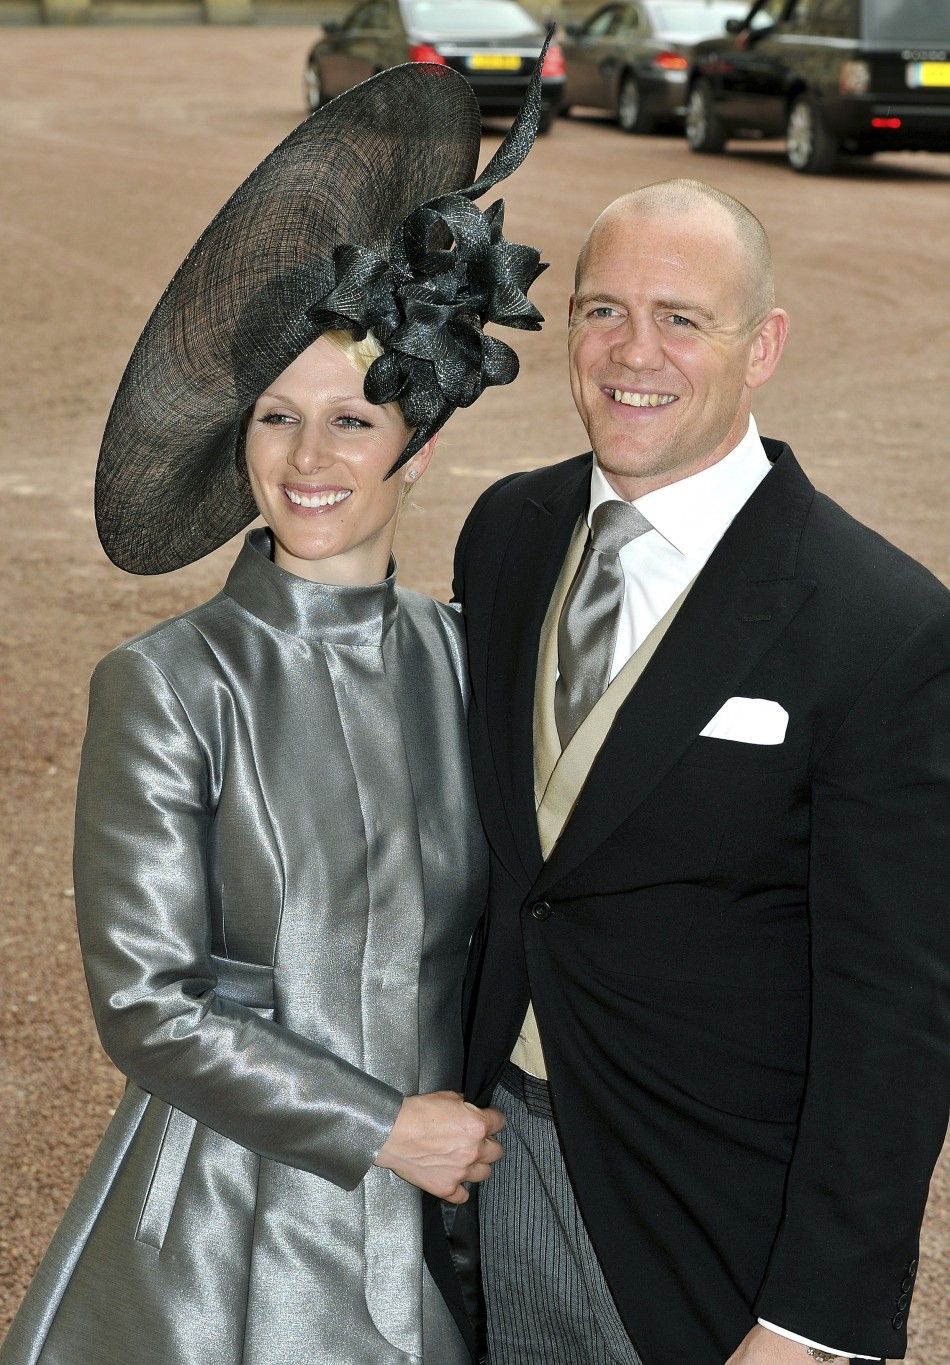 Britains Zara Phillips and her fiance Mike Tindall leave the wedding reception for Prince William and his wife Catherine, Duchess of Cambridge, at the Buckingham Palace in London